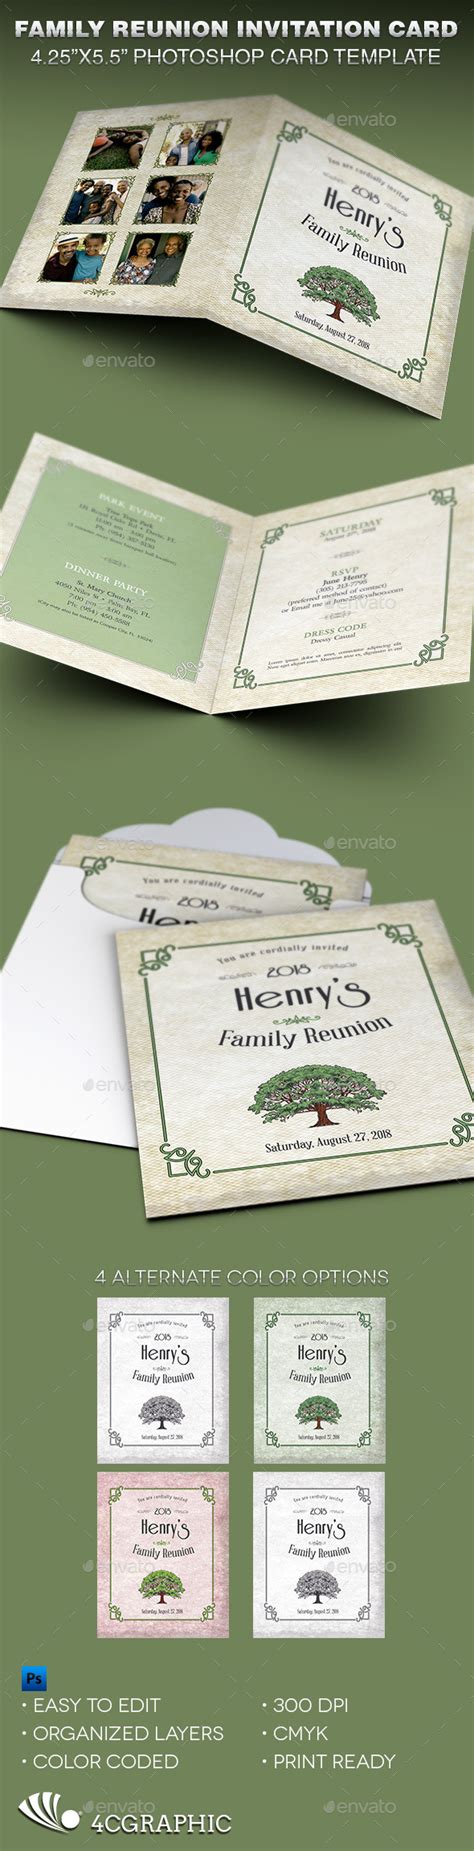 Looking for family reunion party invitation template template fotojet? Family Reunion Invitation Card Template by 4cgraphic ...